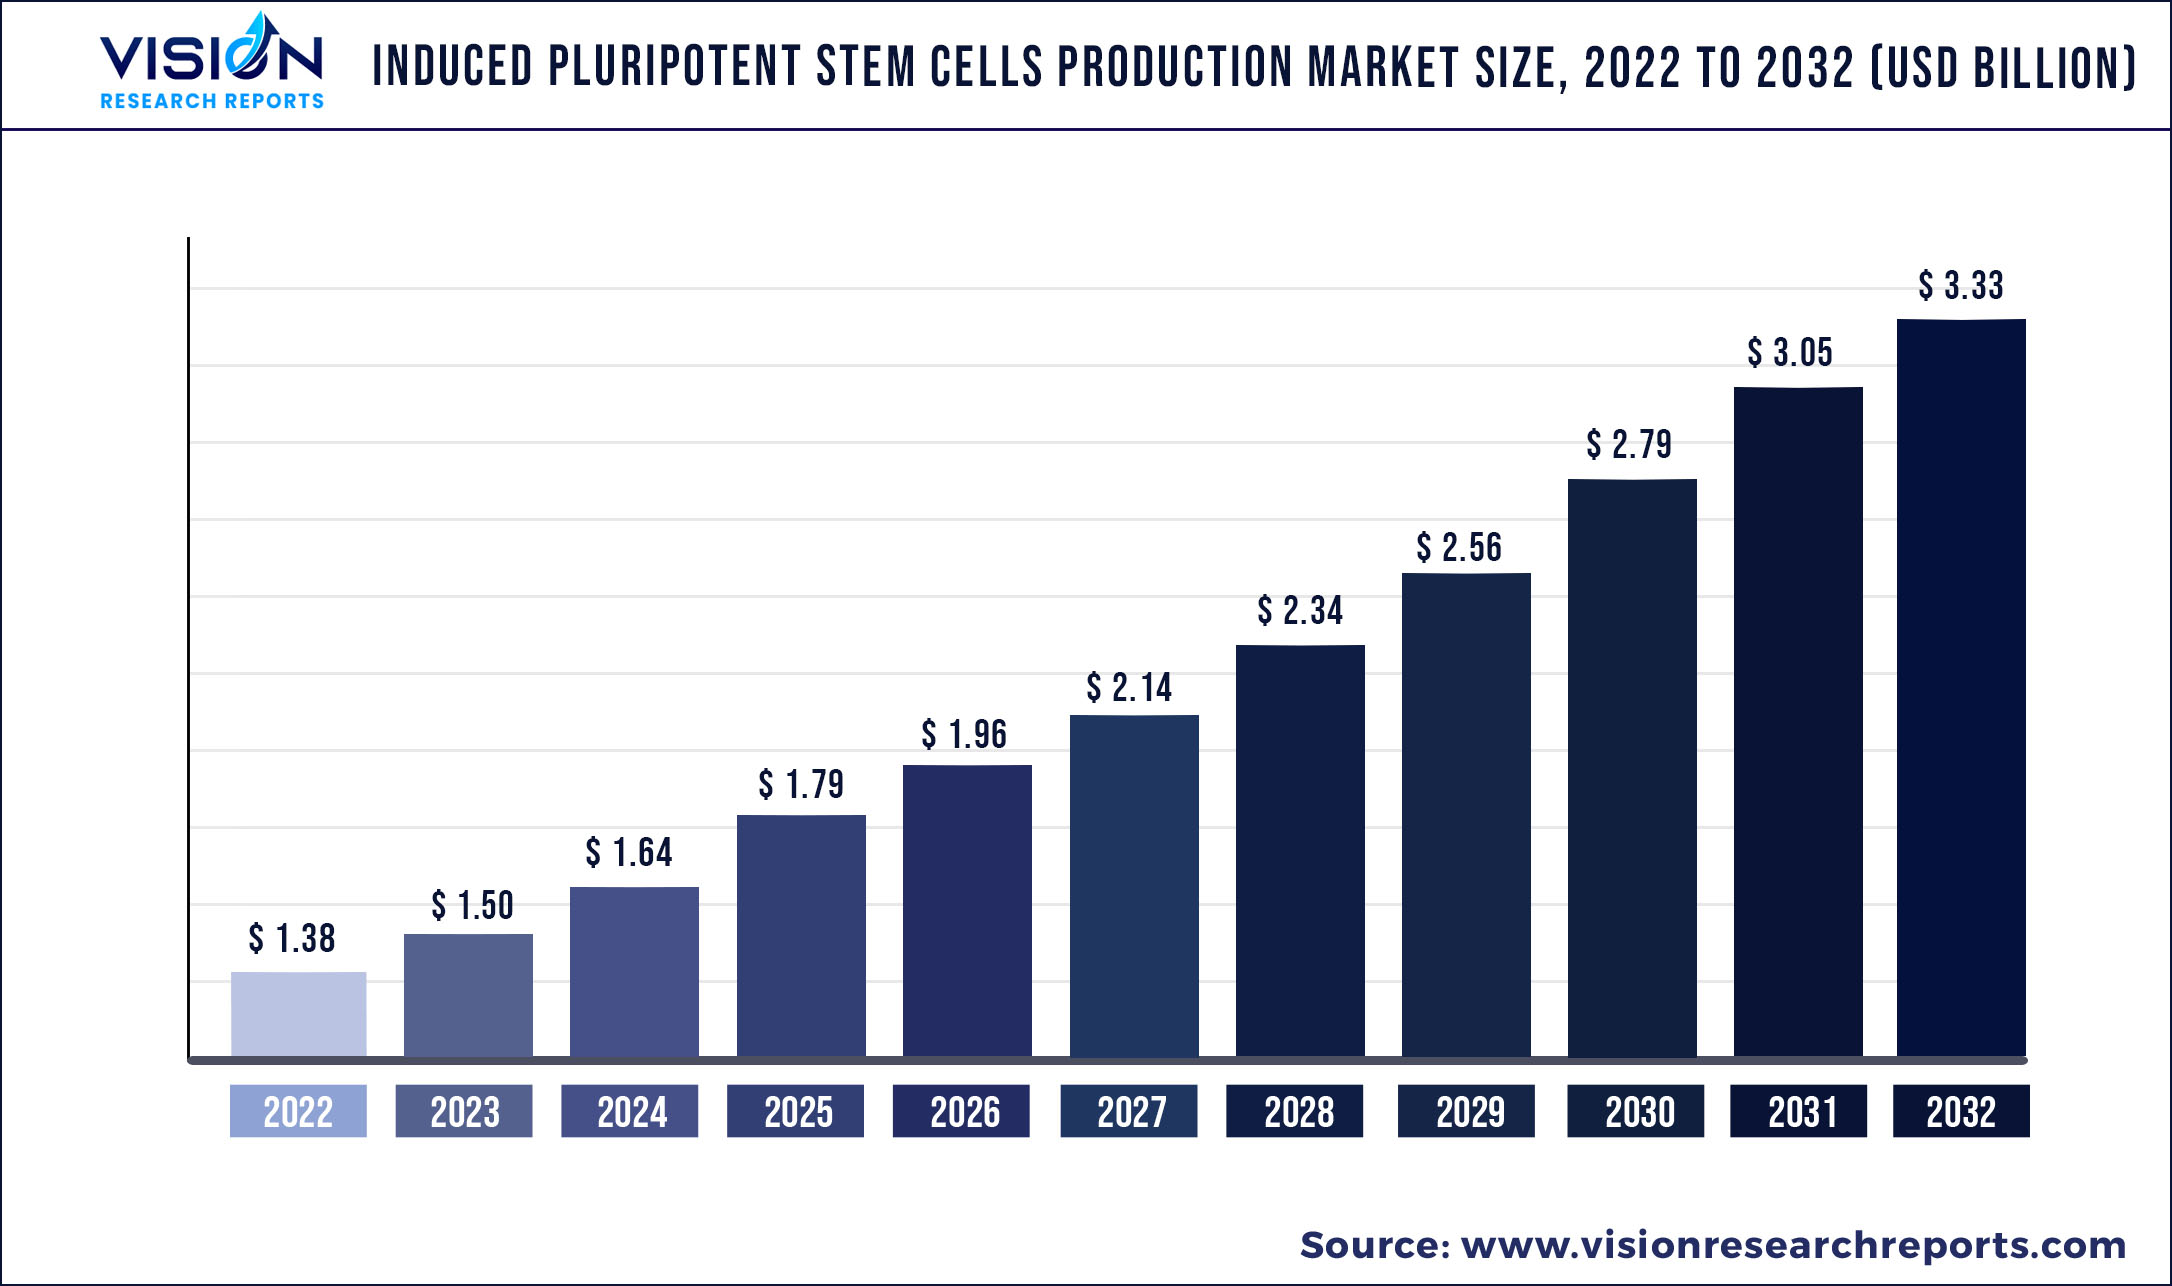 Induced Pluripotent Stem Cells Production Market Size 2023 to 2032